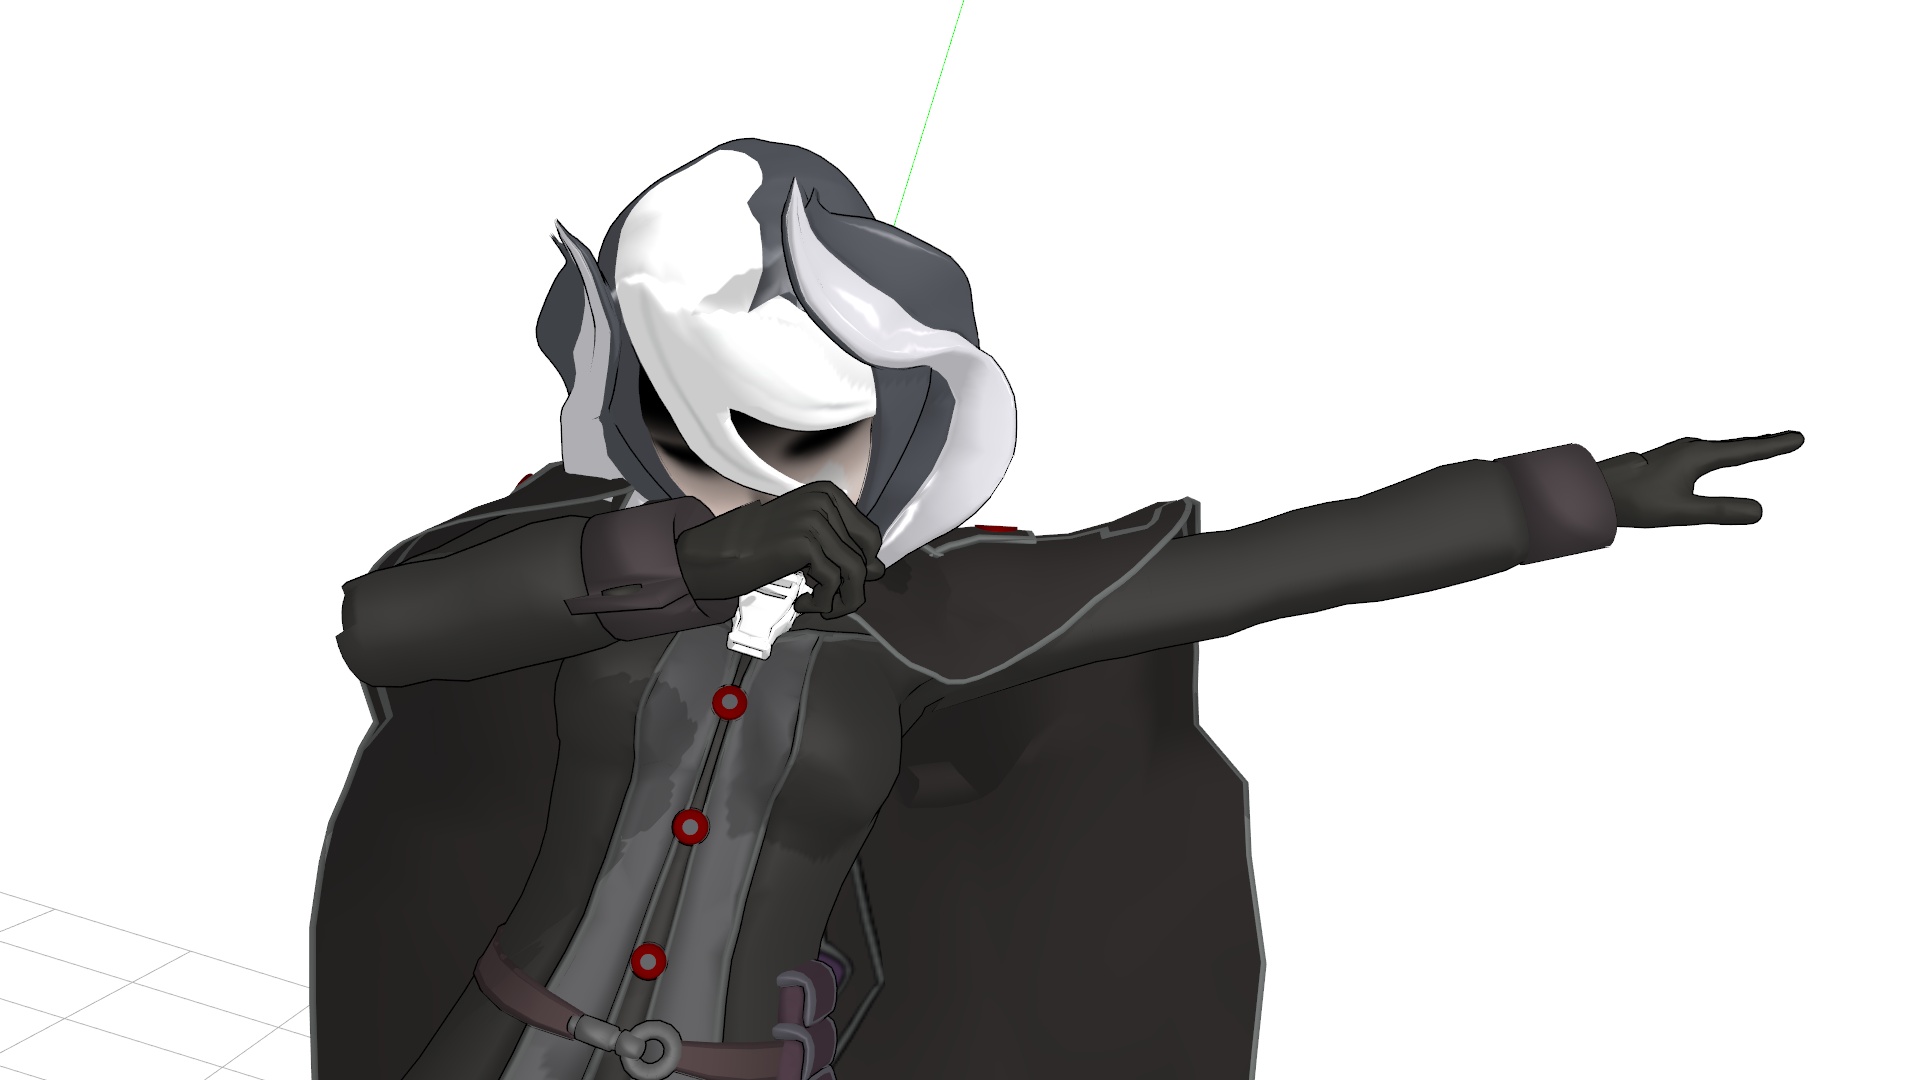 [mmd] Ozen The Immovable - Mask , HD Wallpaper & Backgrounds